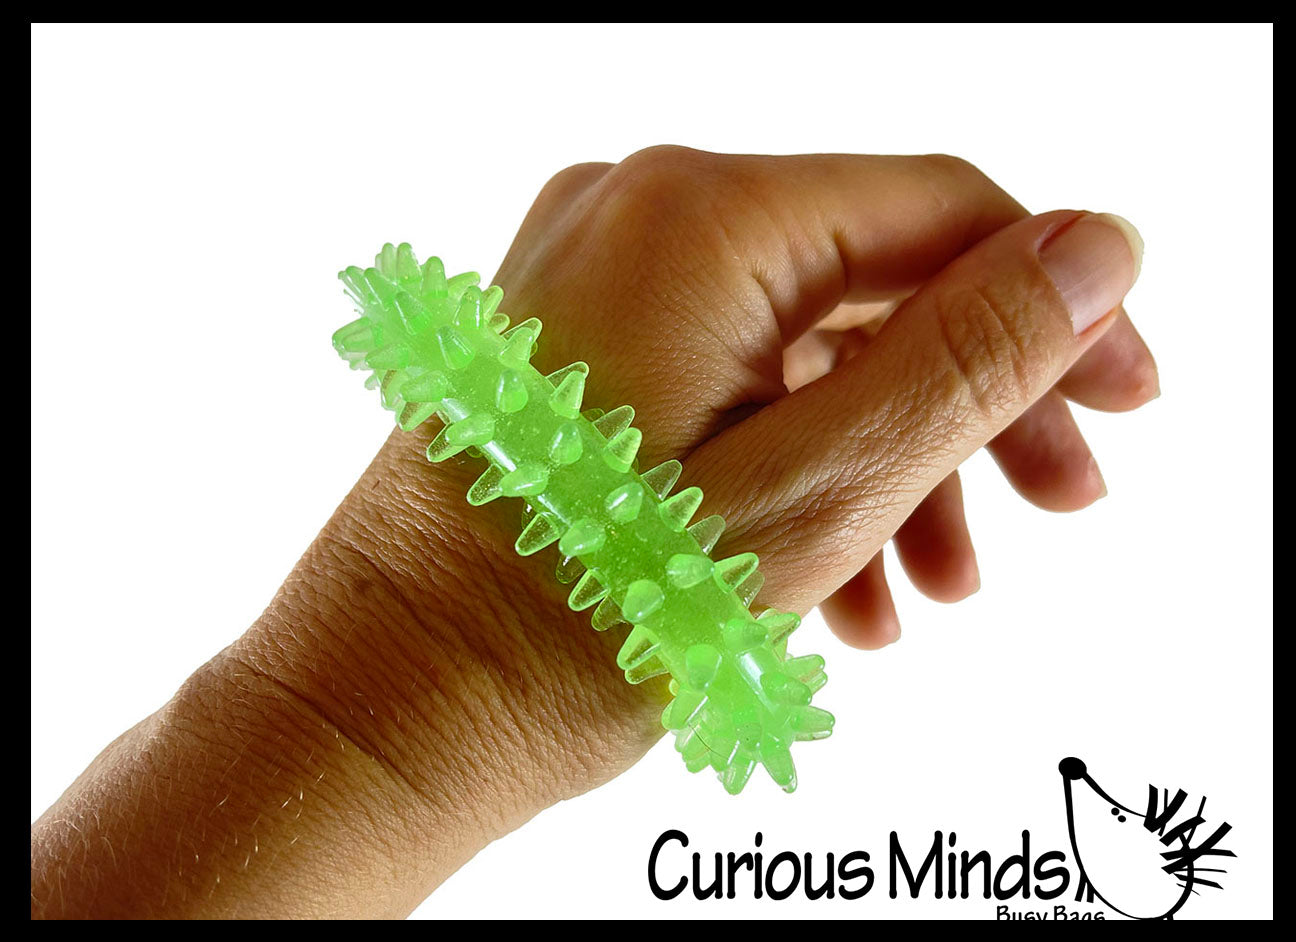 LAST CHANCE - LIMITED STOCK - SALE - Stretchy Finger Fidget - Hand and